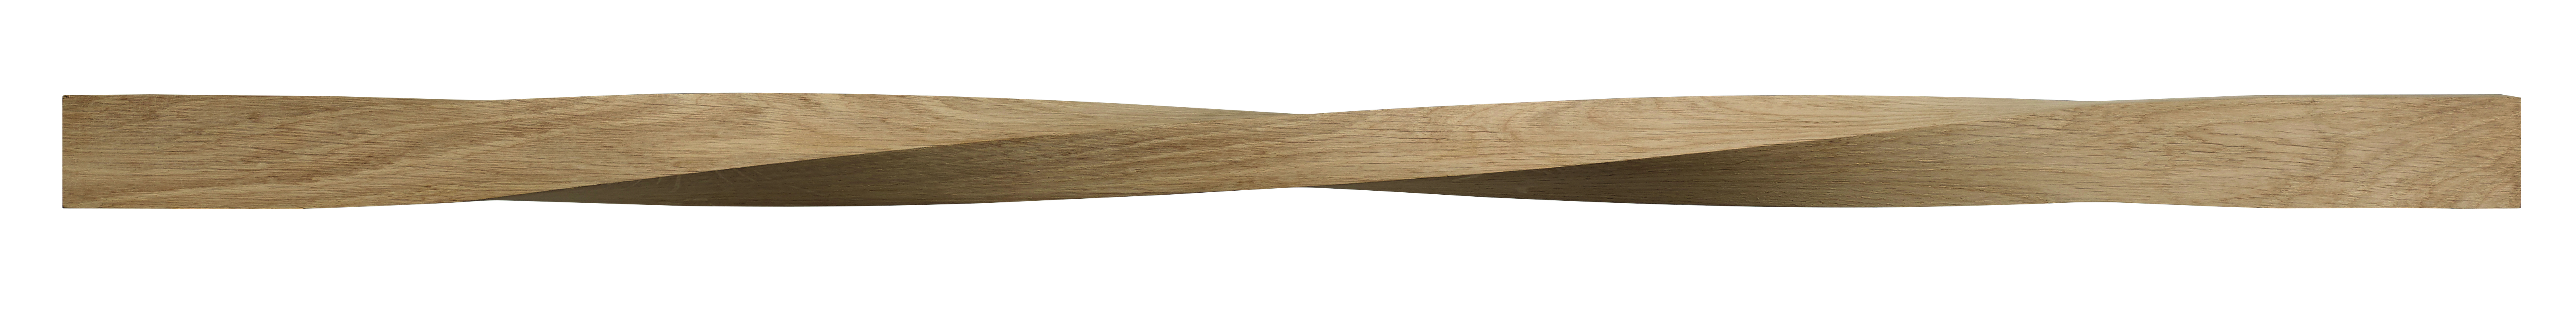 1 OAK TWISTED SPINDLE 900 X 41